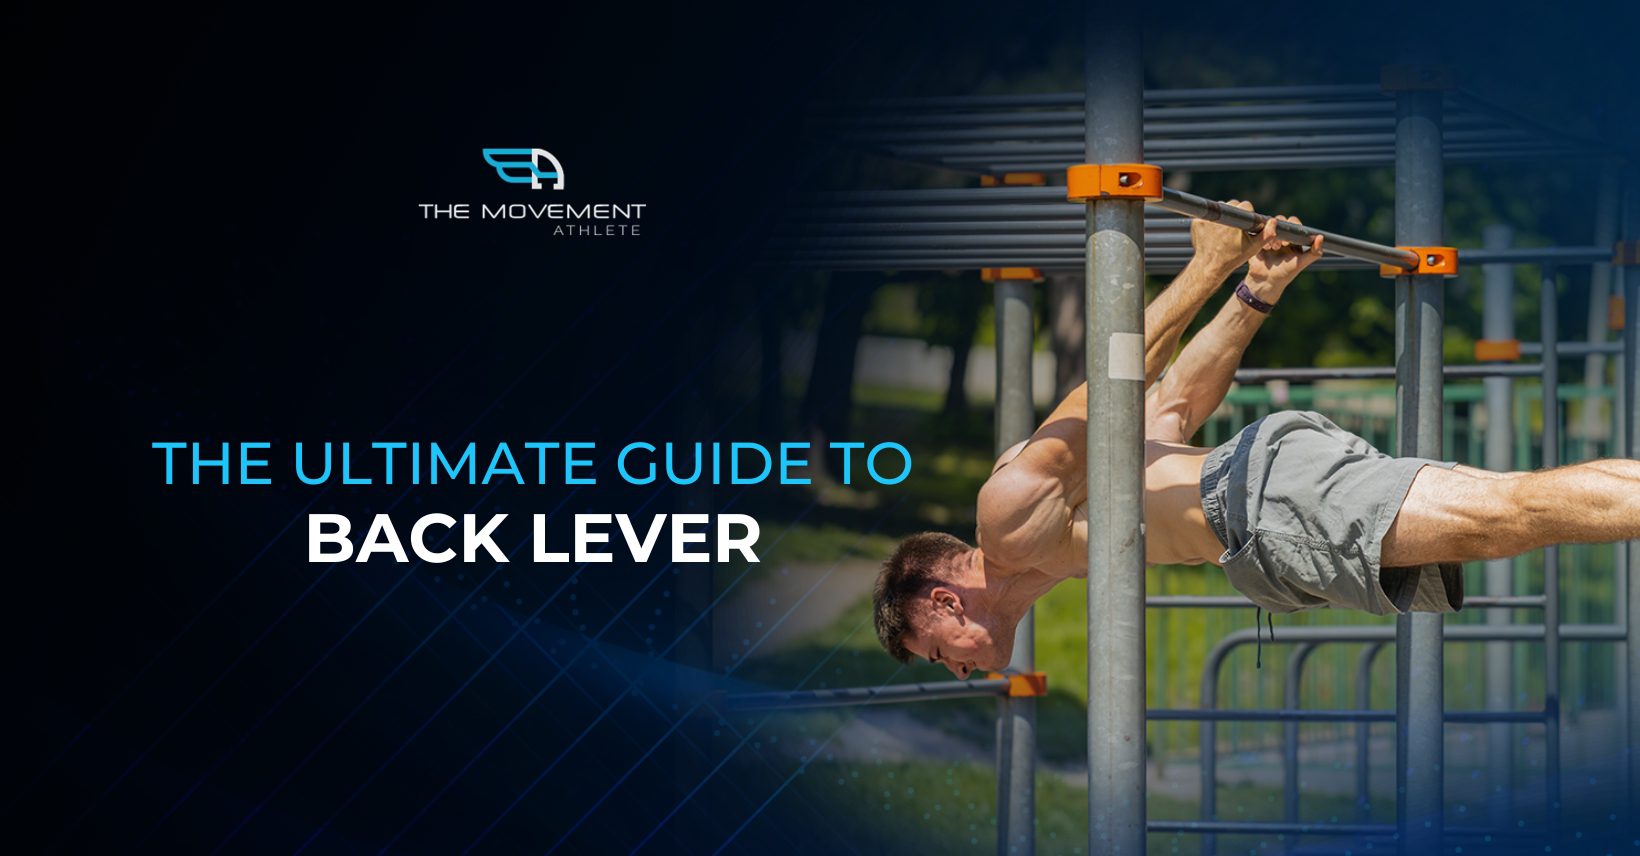 The Ultimate Guide to Back Lever